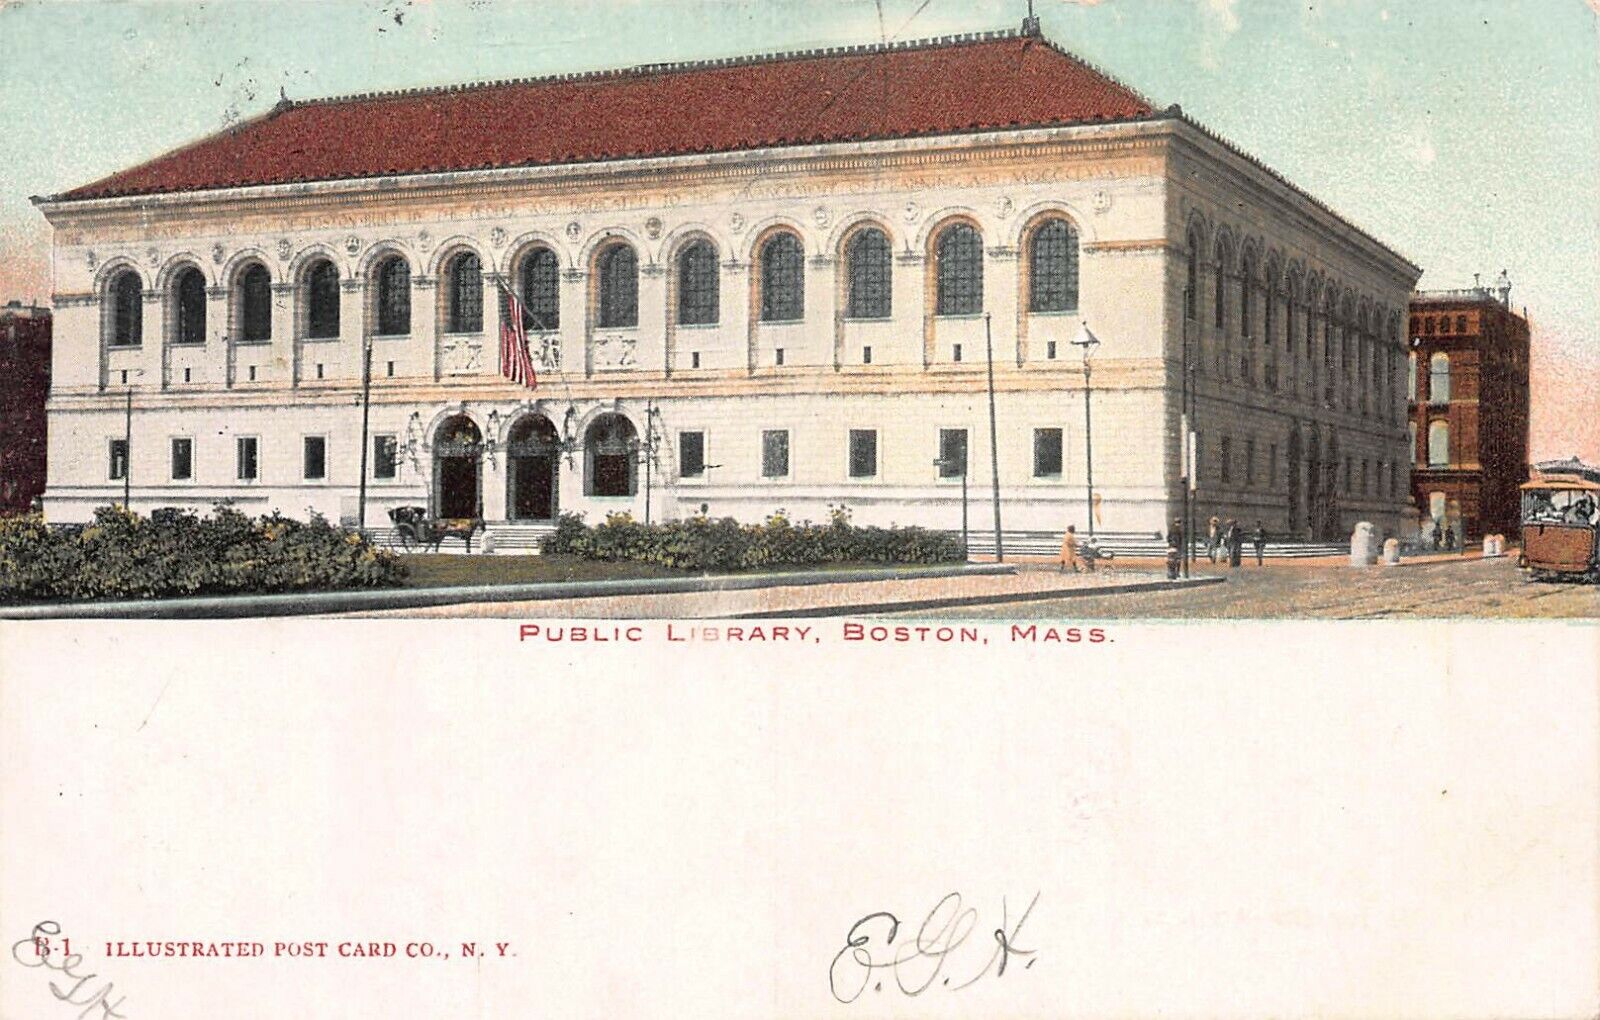 Public Library, Boston, Massachusetts, Early Postcard, Used in 1907